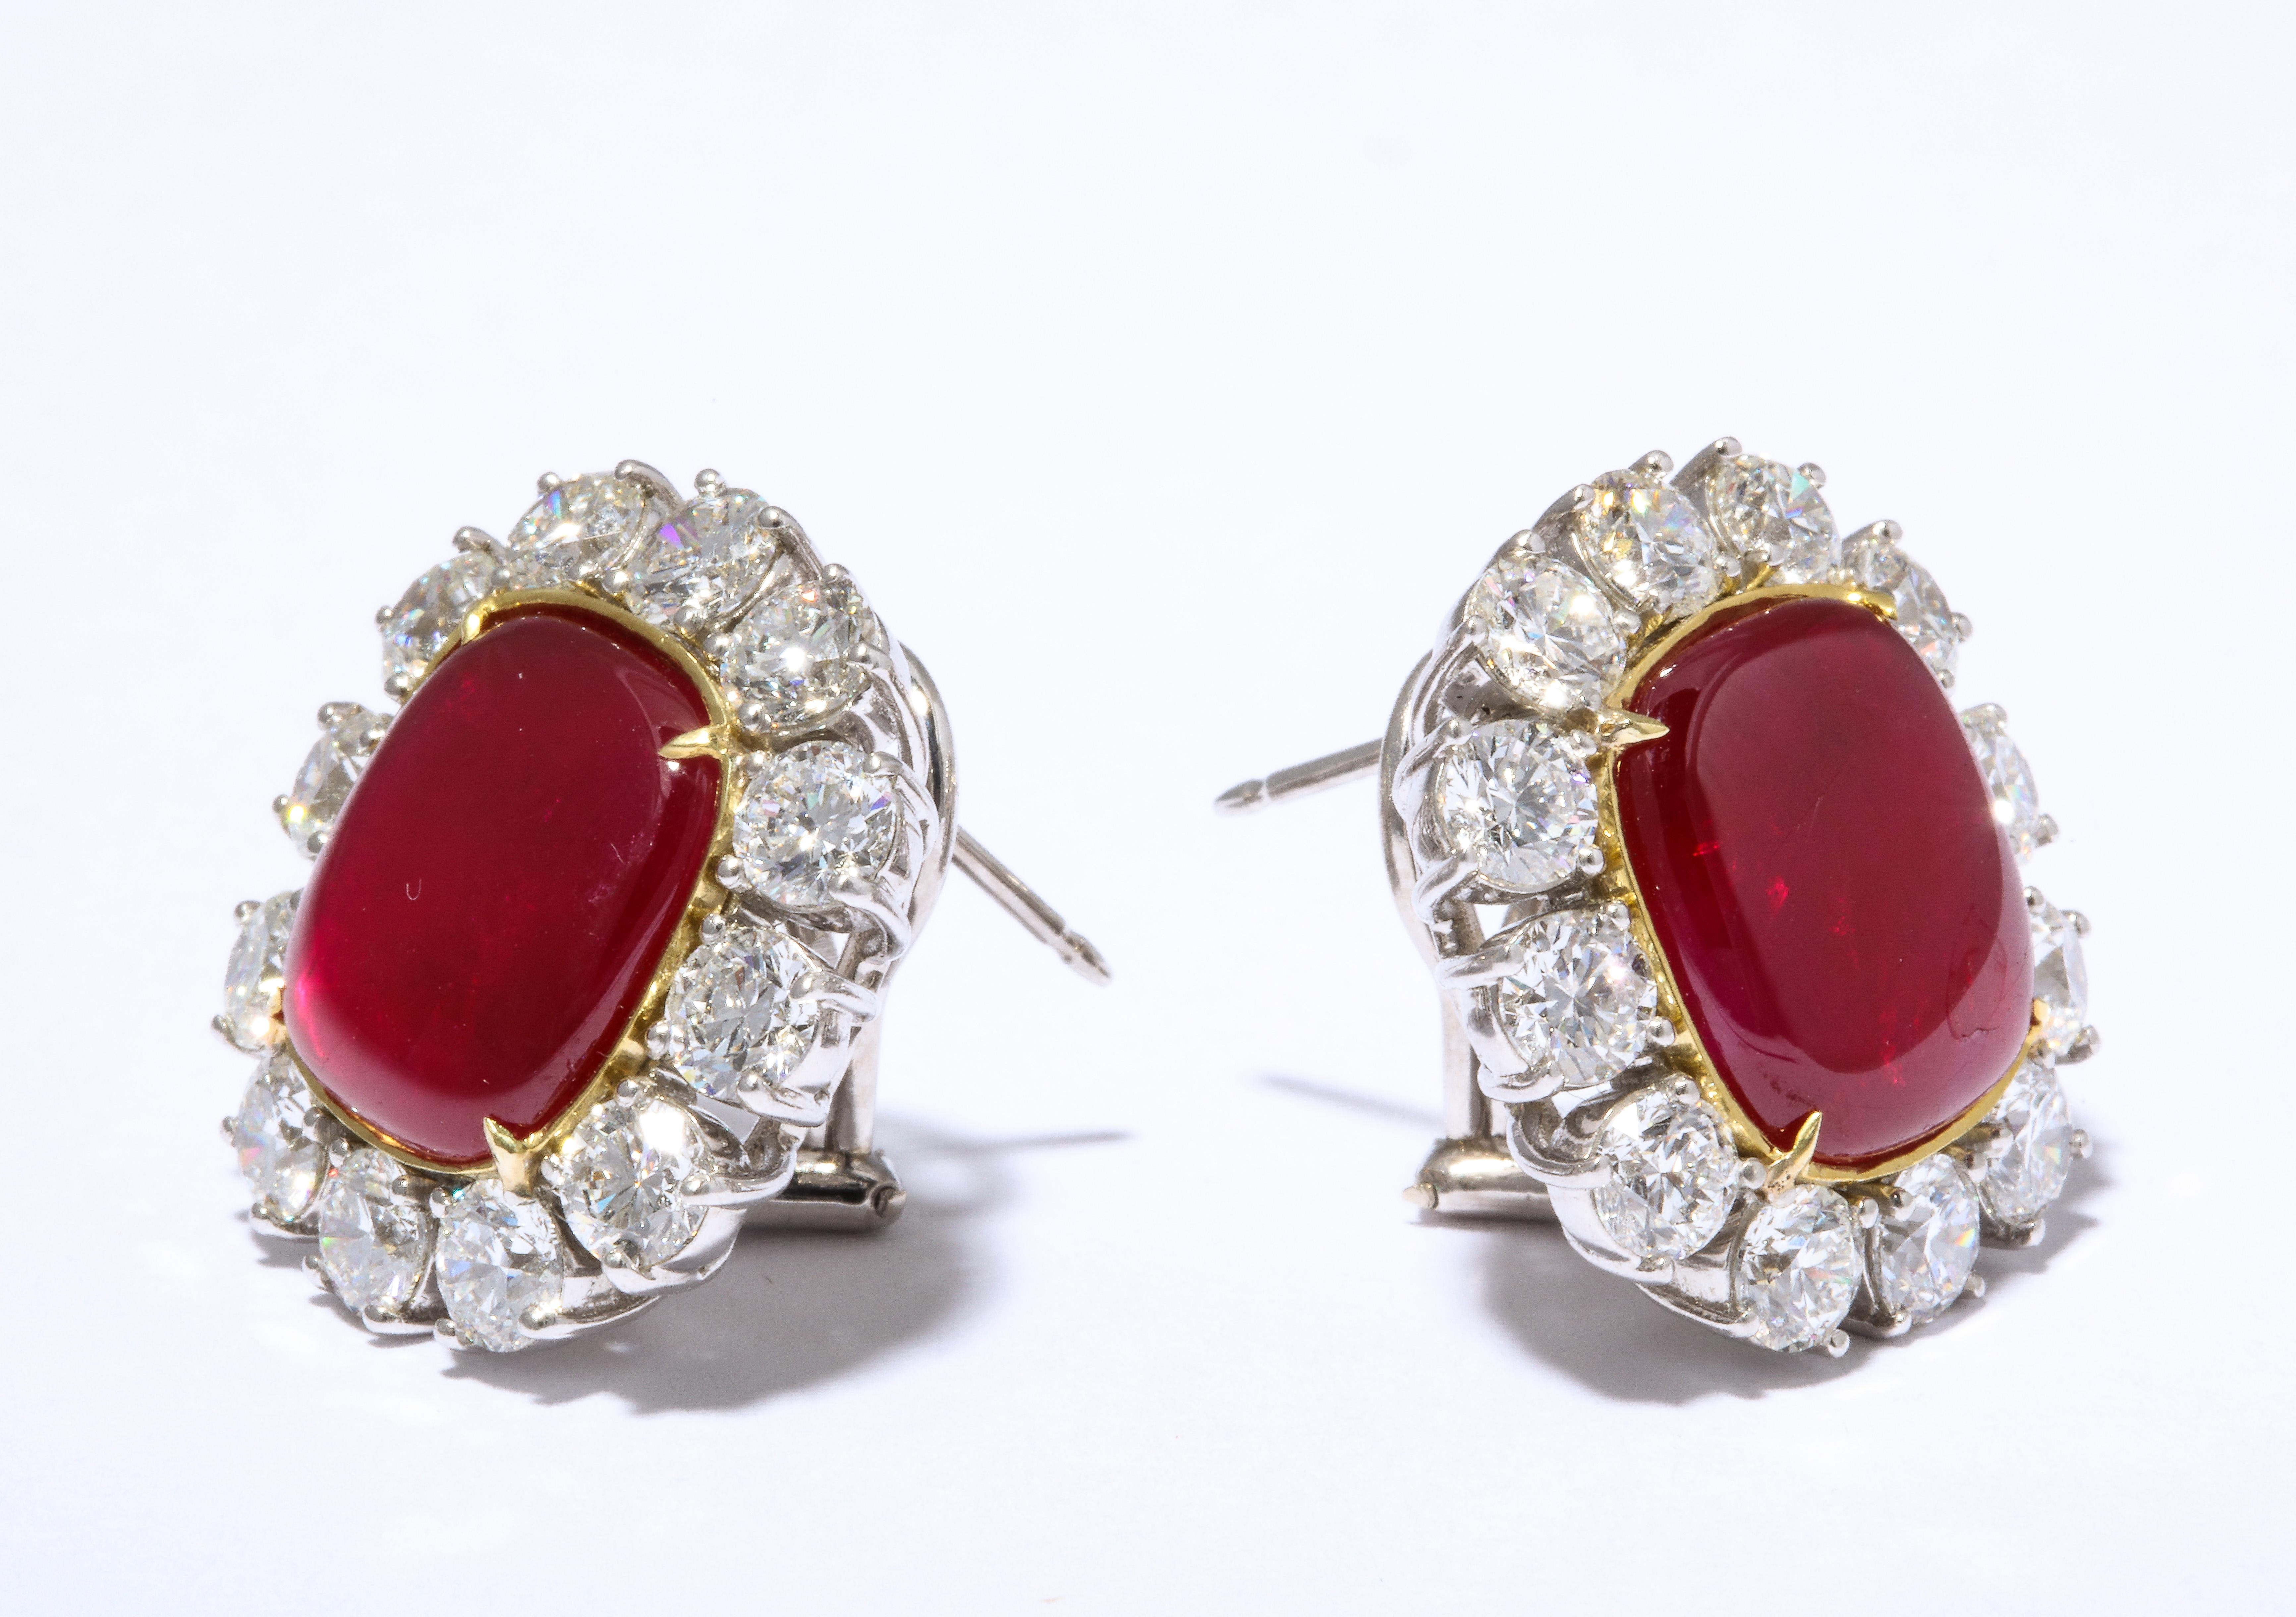 
A RARE FIND! 

A pair of perfectly matched cushion shape cabochon INTENSE RED Burma Ruby earrings. 

The rubies weigh 6.42 carats each for a total weight of 12.84 carats. 

Surrounded by 8.52 carats of white round brilliant cut diamonds. 

Set in